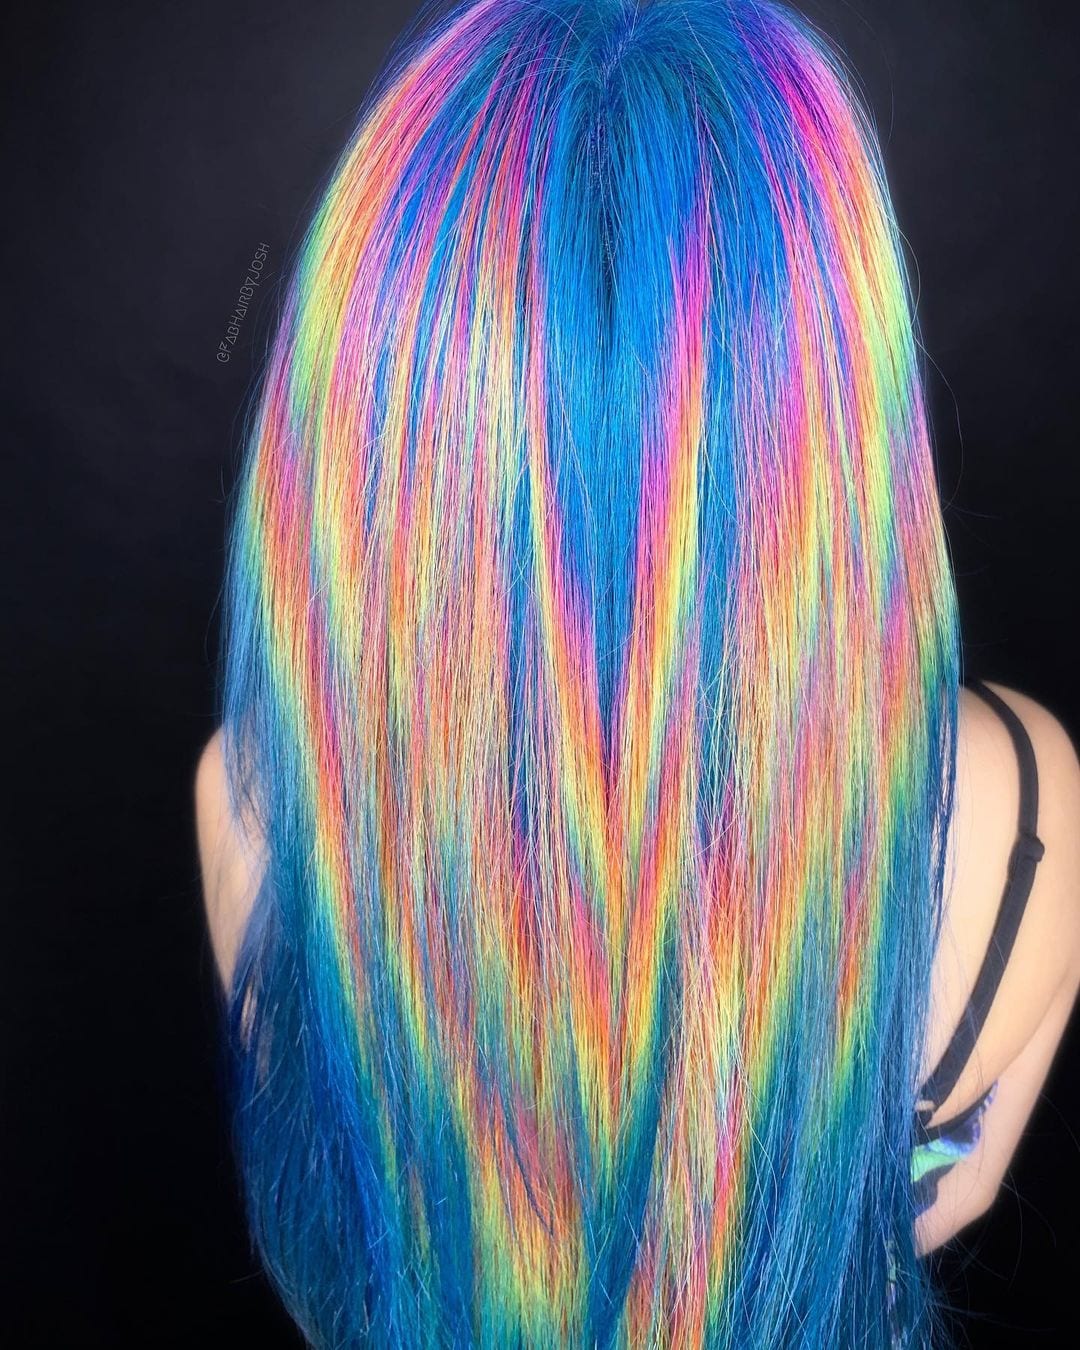 Holographic storm hairstyle on a blonde in a tie dye camisole standing away from the camera in a dark room